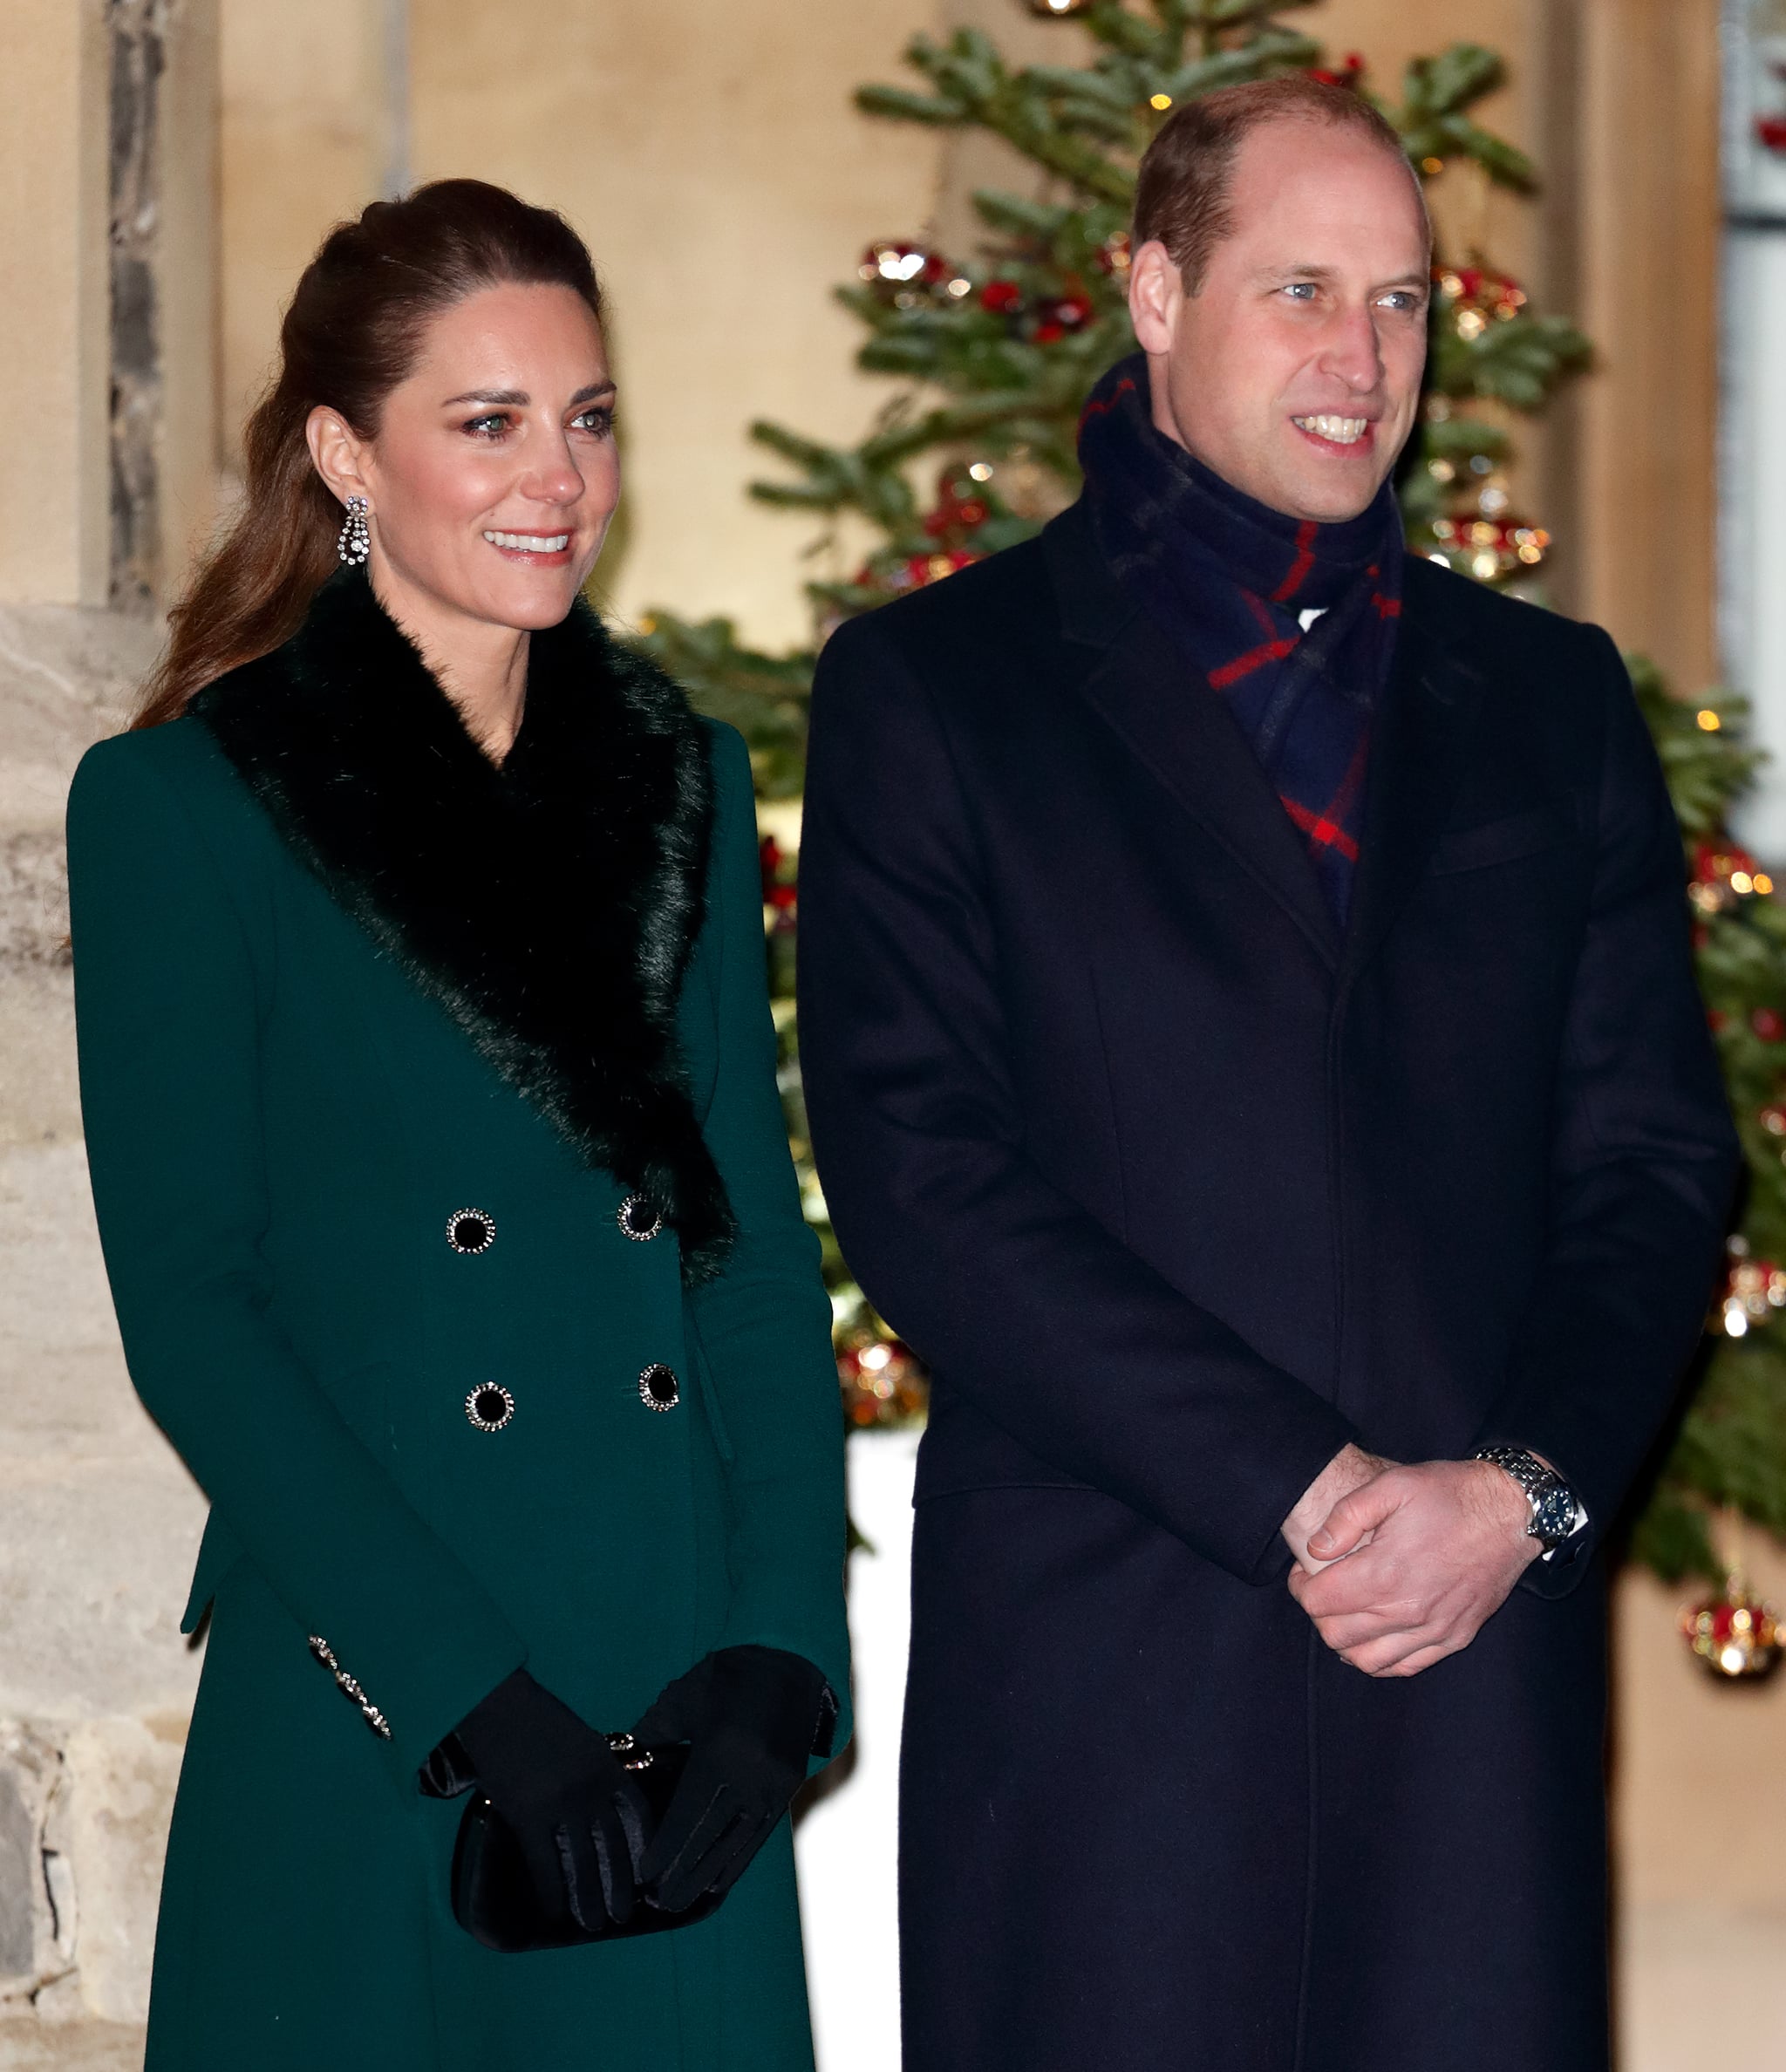 WINDSOR, UNITED KINGDOM - DECEMBER 08: (EMBARGOED FOR PUBLICATION IN UK NEWSPAPERS UNTIL 24 HOURS AFTER CREATE DATE AND TIME) Catherine, Duchess of Cambridge and  Prince William, Duke of Cambridge attend an event to thank local volunteers and key workers from organisations and charities in Berkshire, who will be volunteering or working to help others over the Christmas period in the quadrangle of Windsor Castle on December 8, 2020 in Windsor, England. During the event members of the Royal Family also listened to Christmas carols performed by The Salvation Army Band. (Photo by Max Mumby/Indigo - Pool/Getty Images)